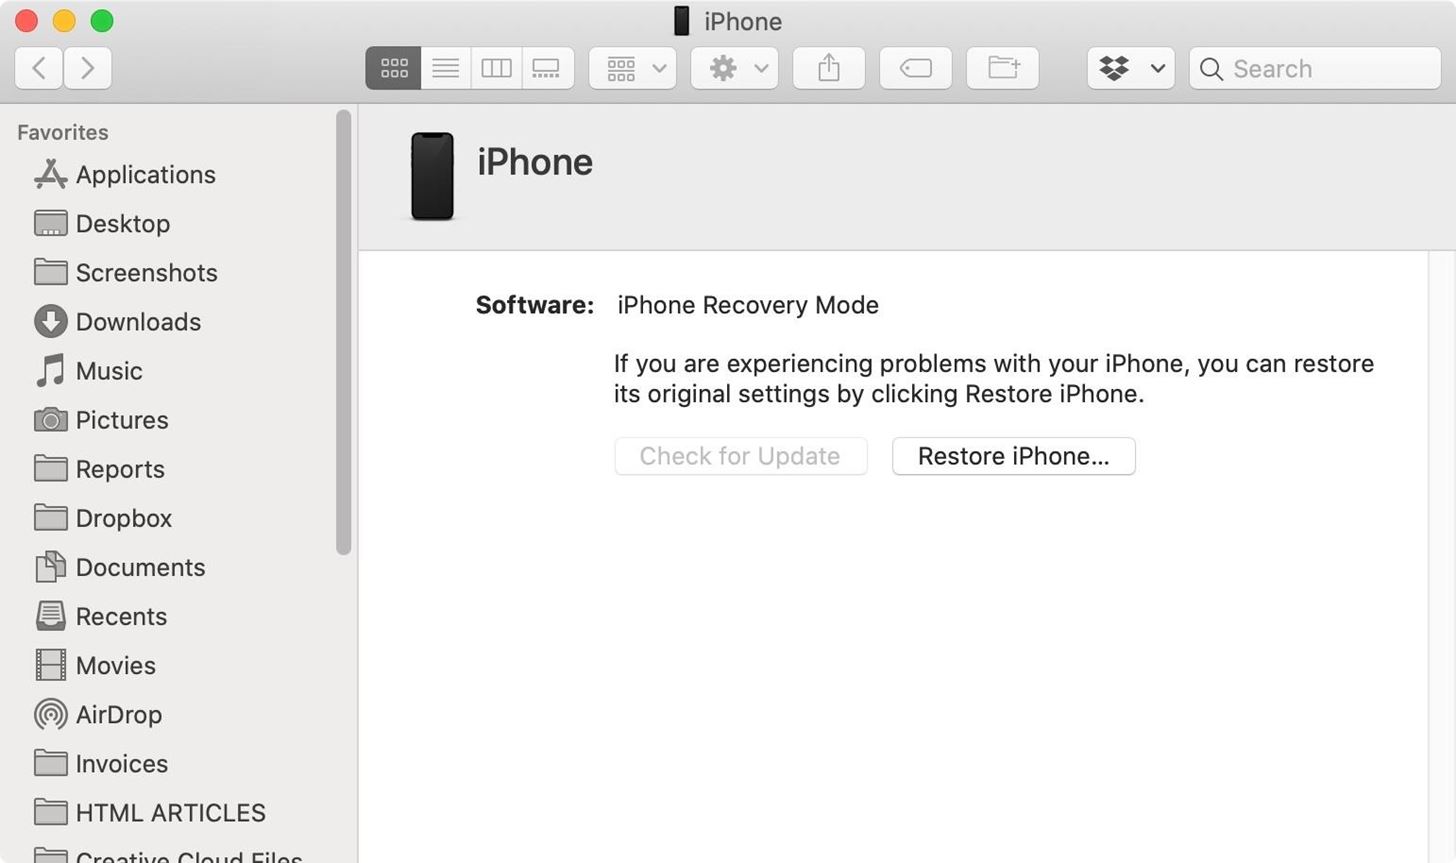 How to enter DFU mode on your iPhone 12, 12 Mini, 12 Pro or 12 Pro Max in Finder or iTunes to restore iOS 14